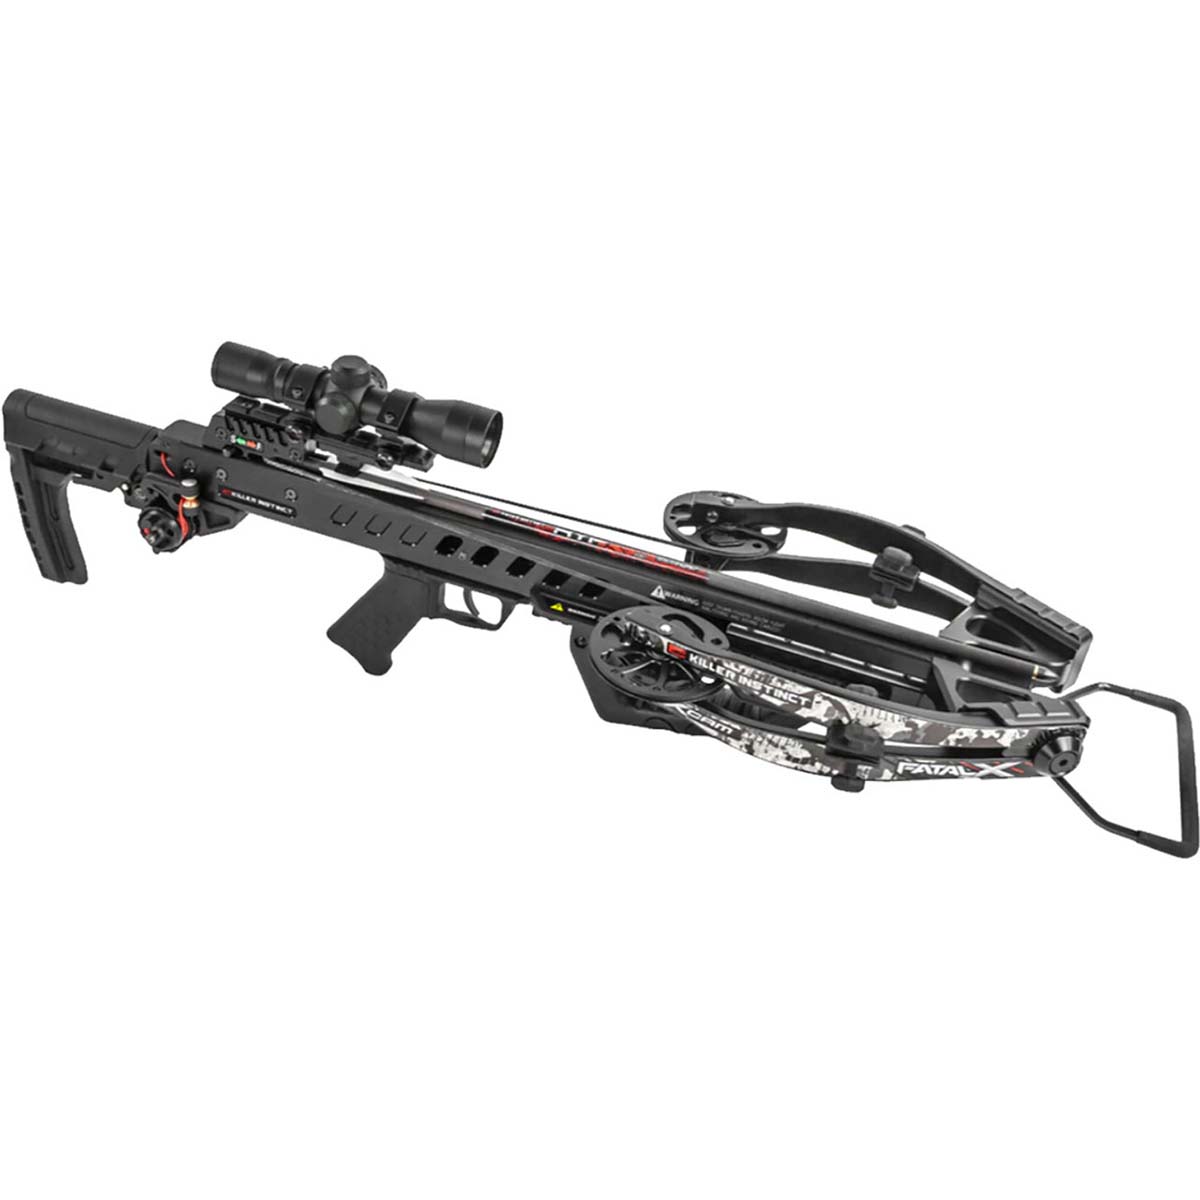 Killer Instinct Bone Collector 415 Crossbow Package With Crank